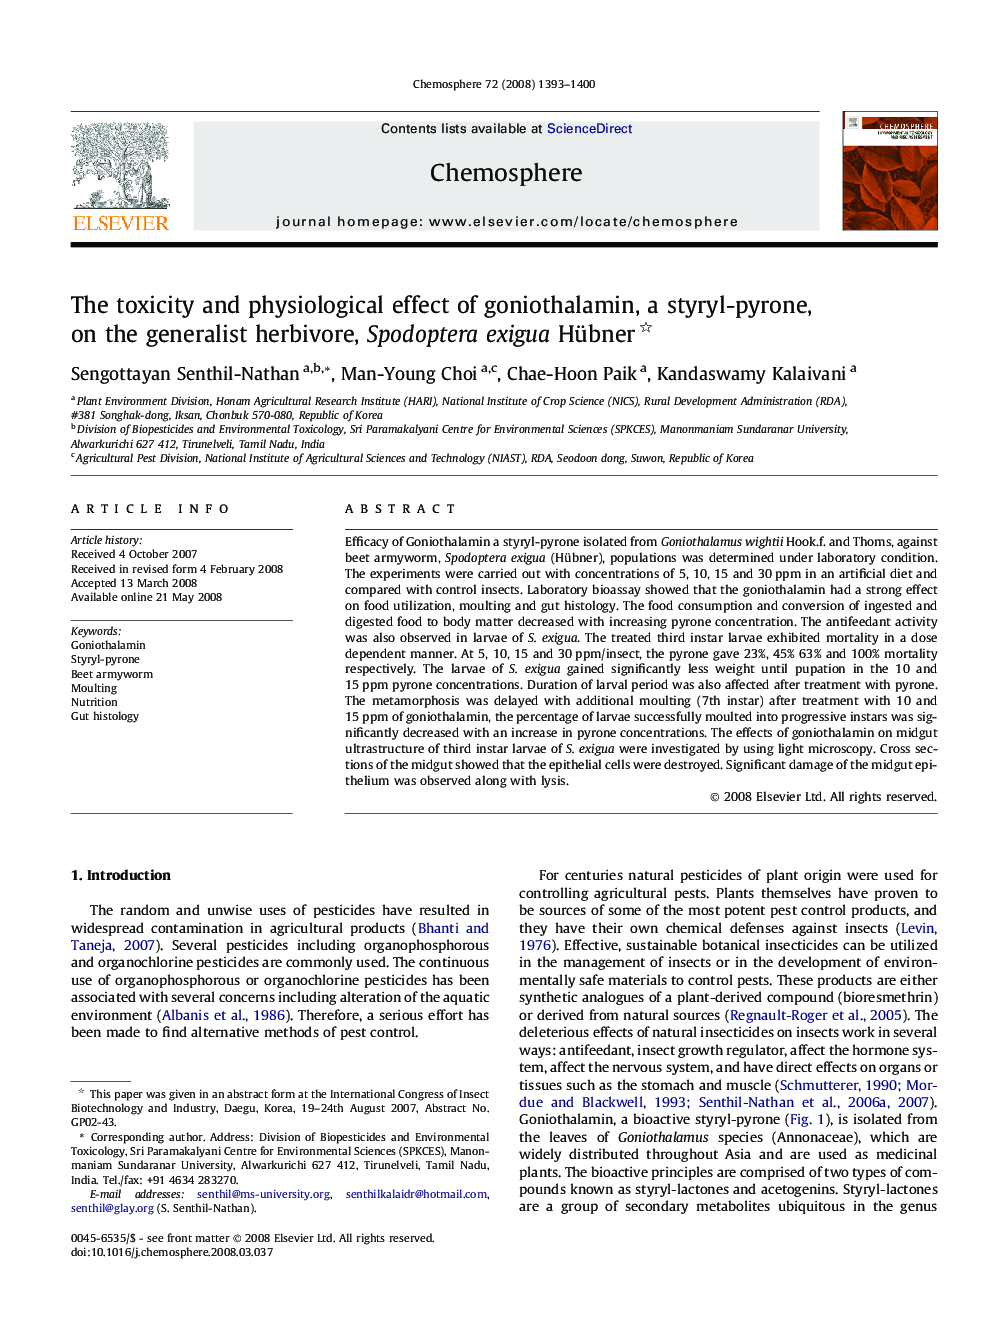 The toxicity and physiological effect of goniothalamin, a styryl-pyrone, on the generalist herbivore, Spodoptera exigua Hübner 